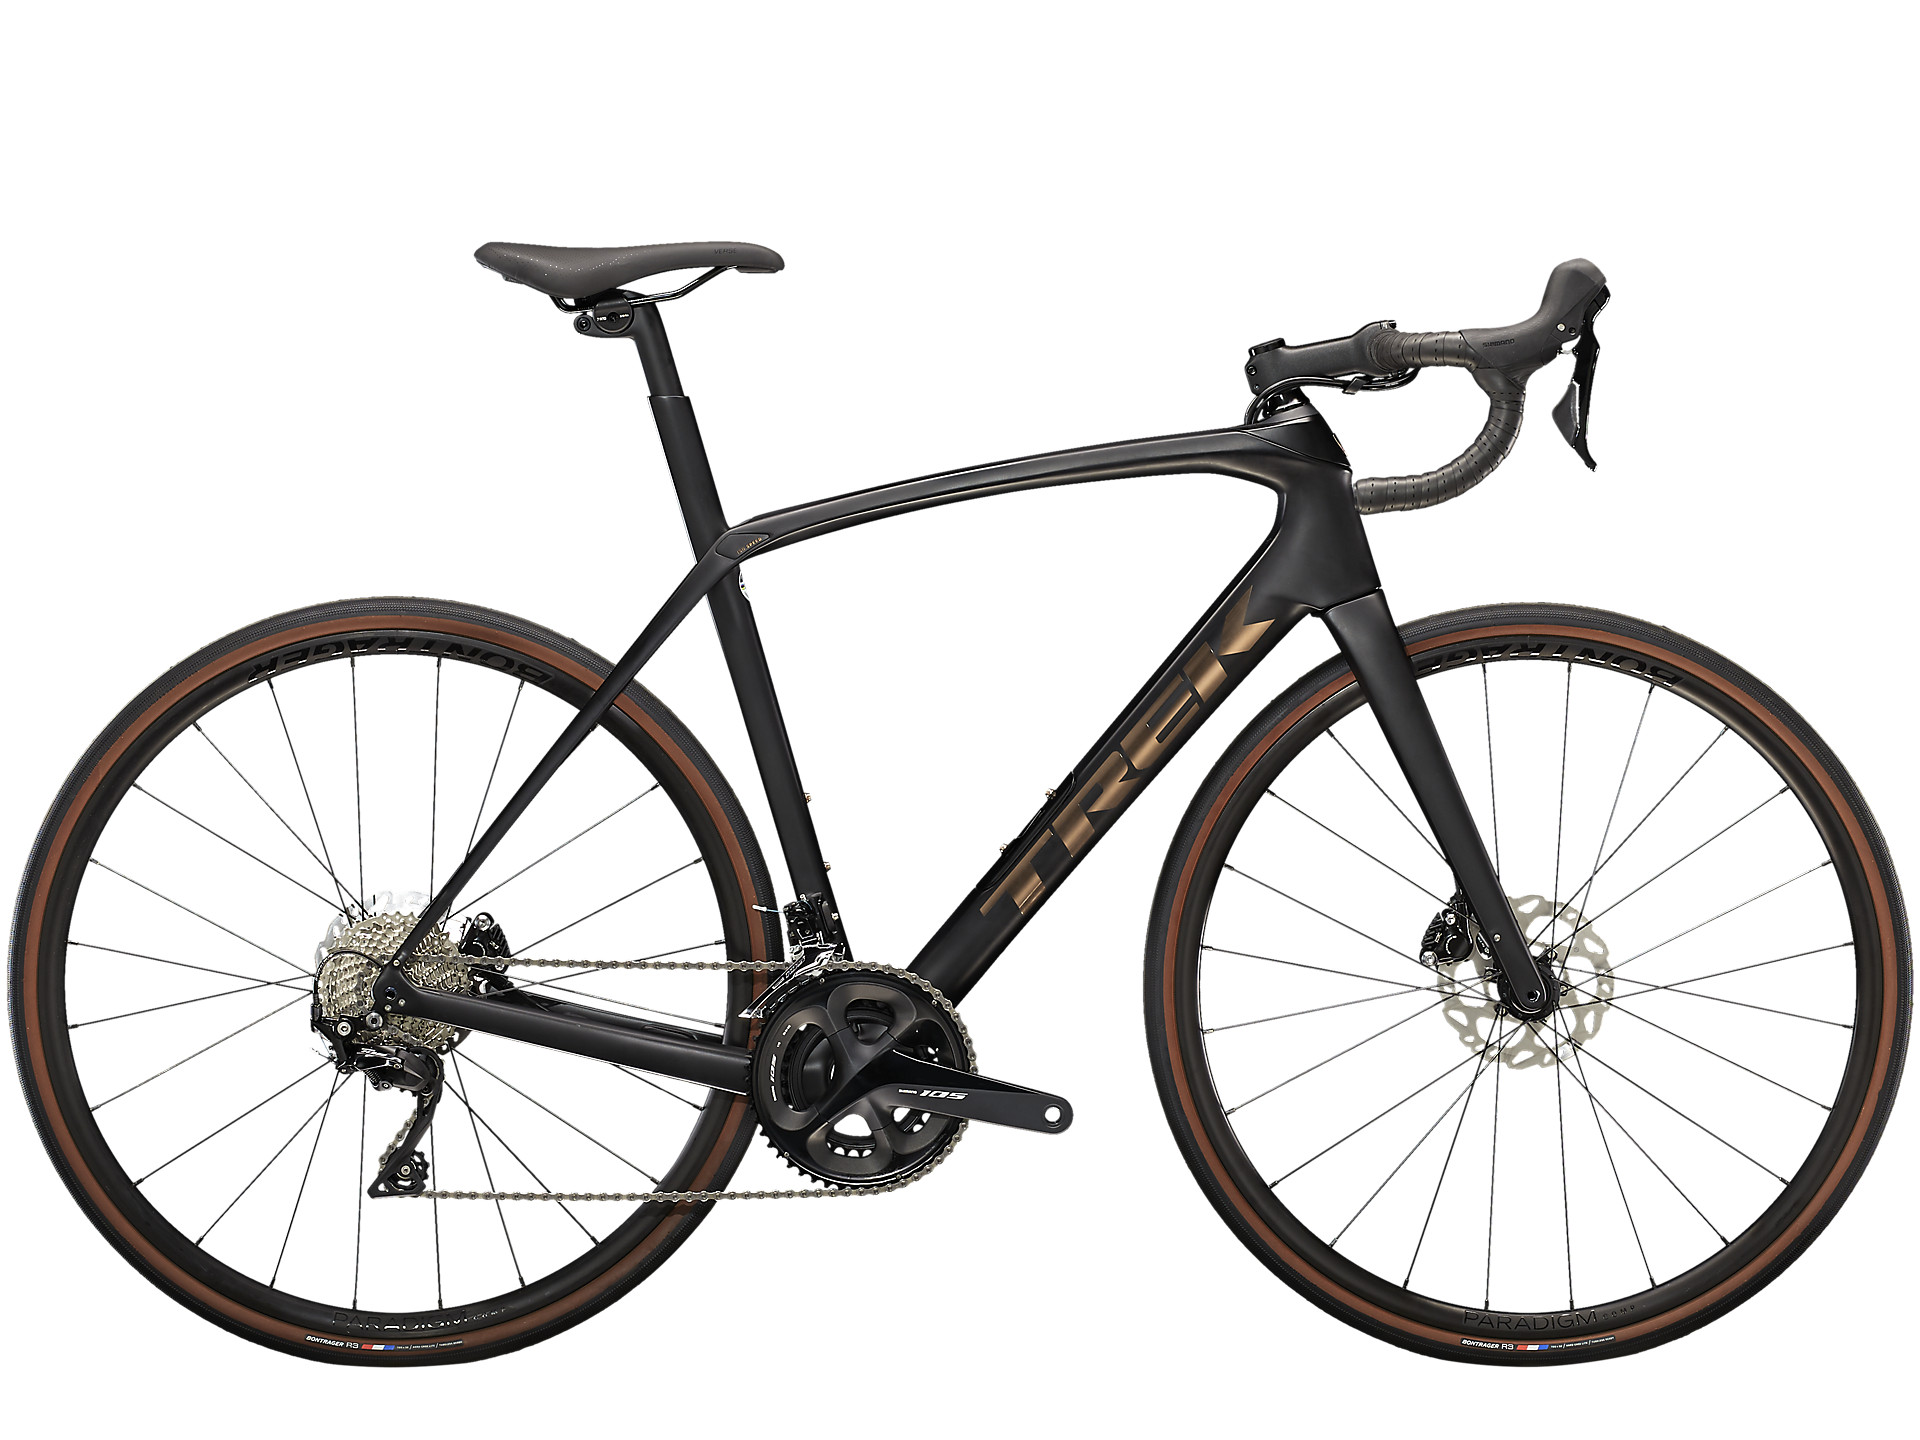 <a href="https://cycles-clement.be/product/domane-sl-5-52-satin-trek-black/">DOMANE SL 5 52 SATIN TREK BLACK</a>